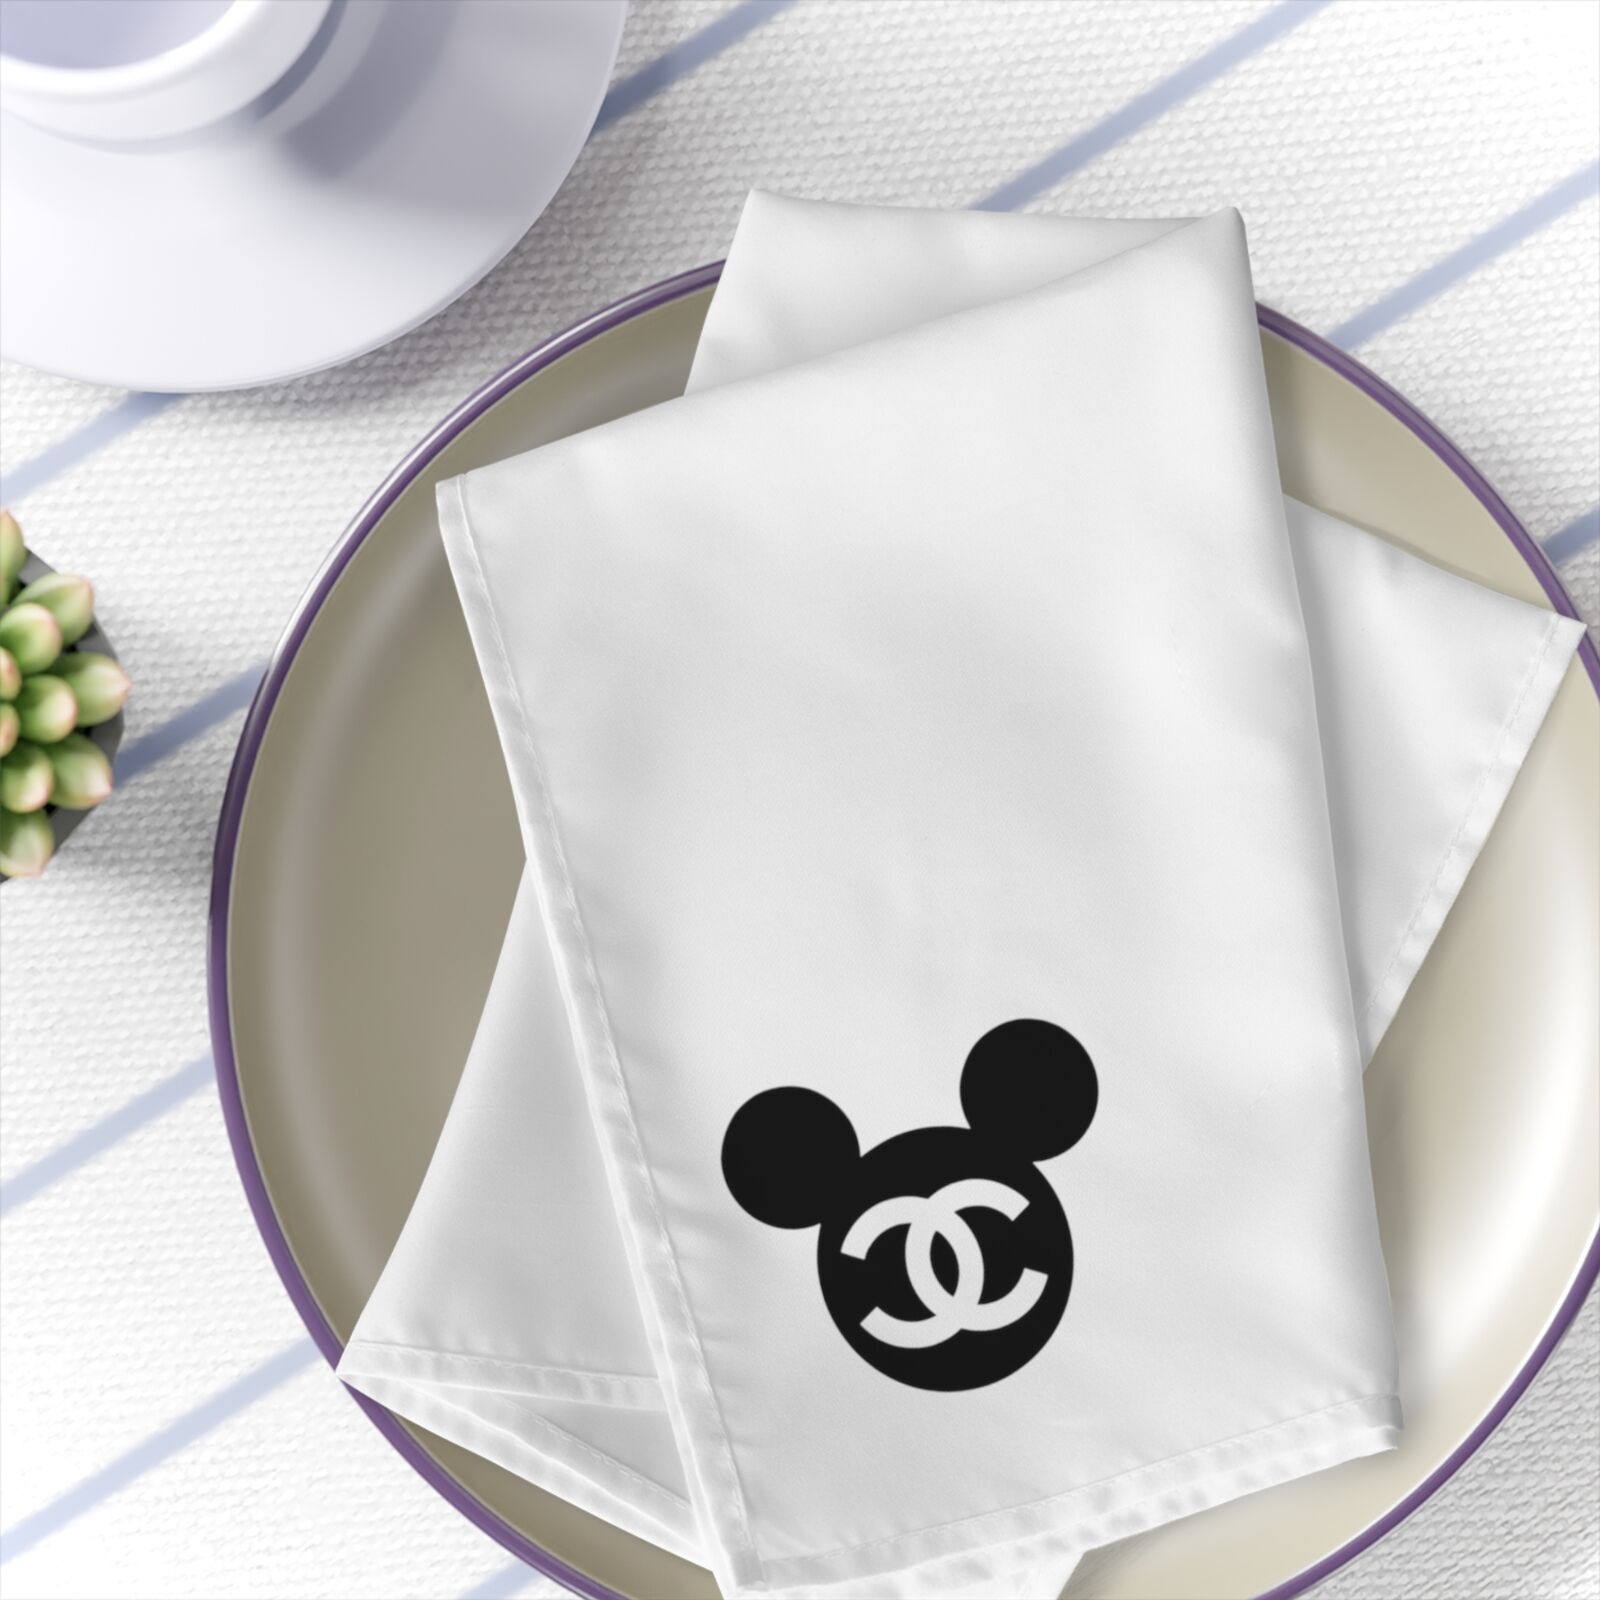 Customized Cloth Dinner Napkin set of 4 Black Chanel Logo Mickey Mouse Specialty